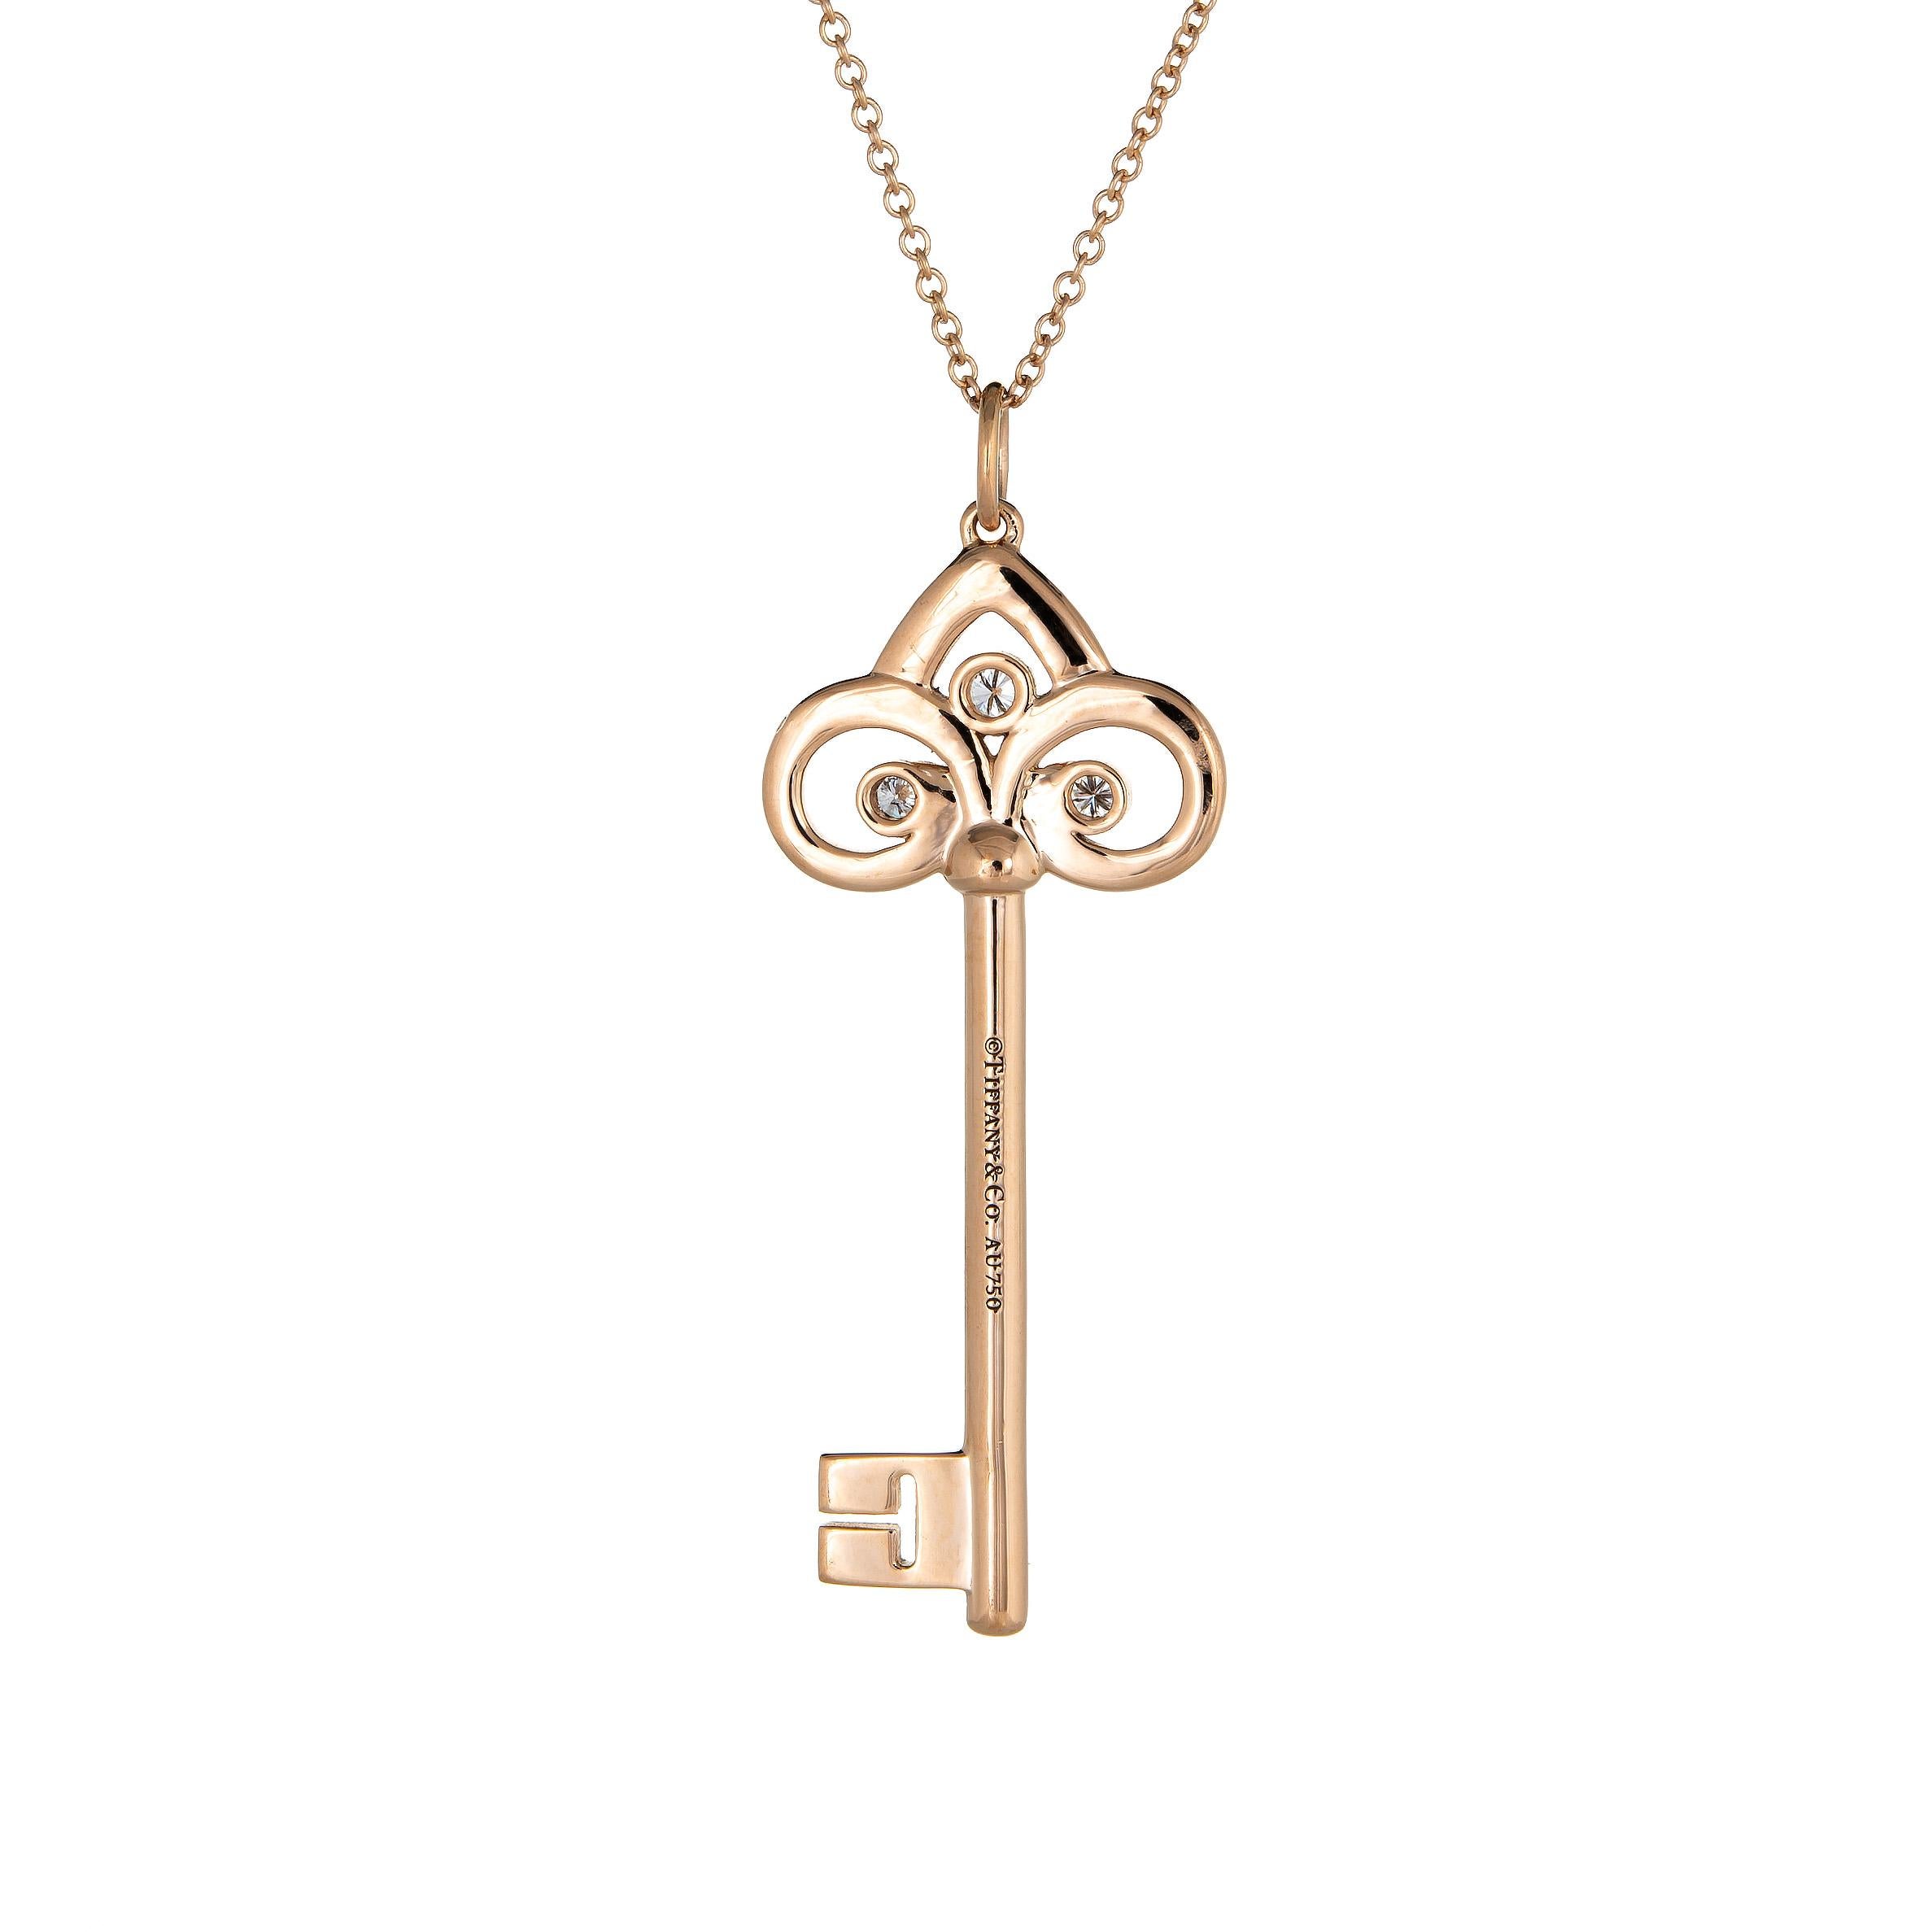 Elegant and finely detailed estate Tiffany & Co medium Fleur de Lis diamond key pendant & necklace crafted in 18 karat rose gold.  

Diamonds total 0.07 carats (estimated at F-G color and VVS2 clarity). 

The key measures 1 1/2 inches in length and